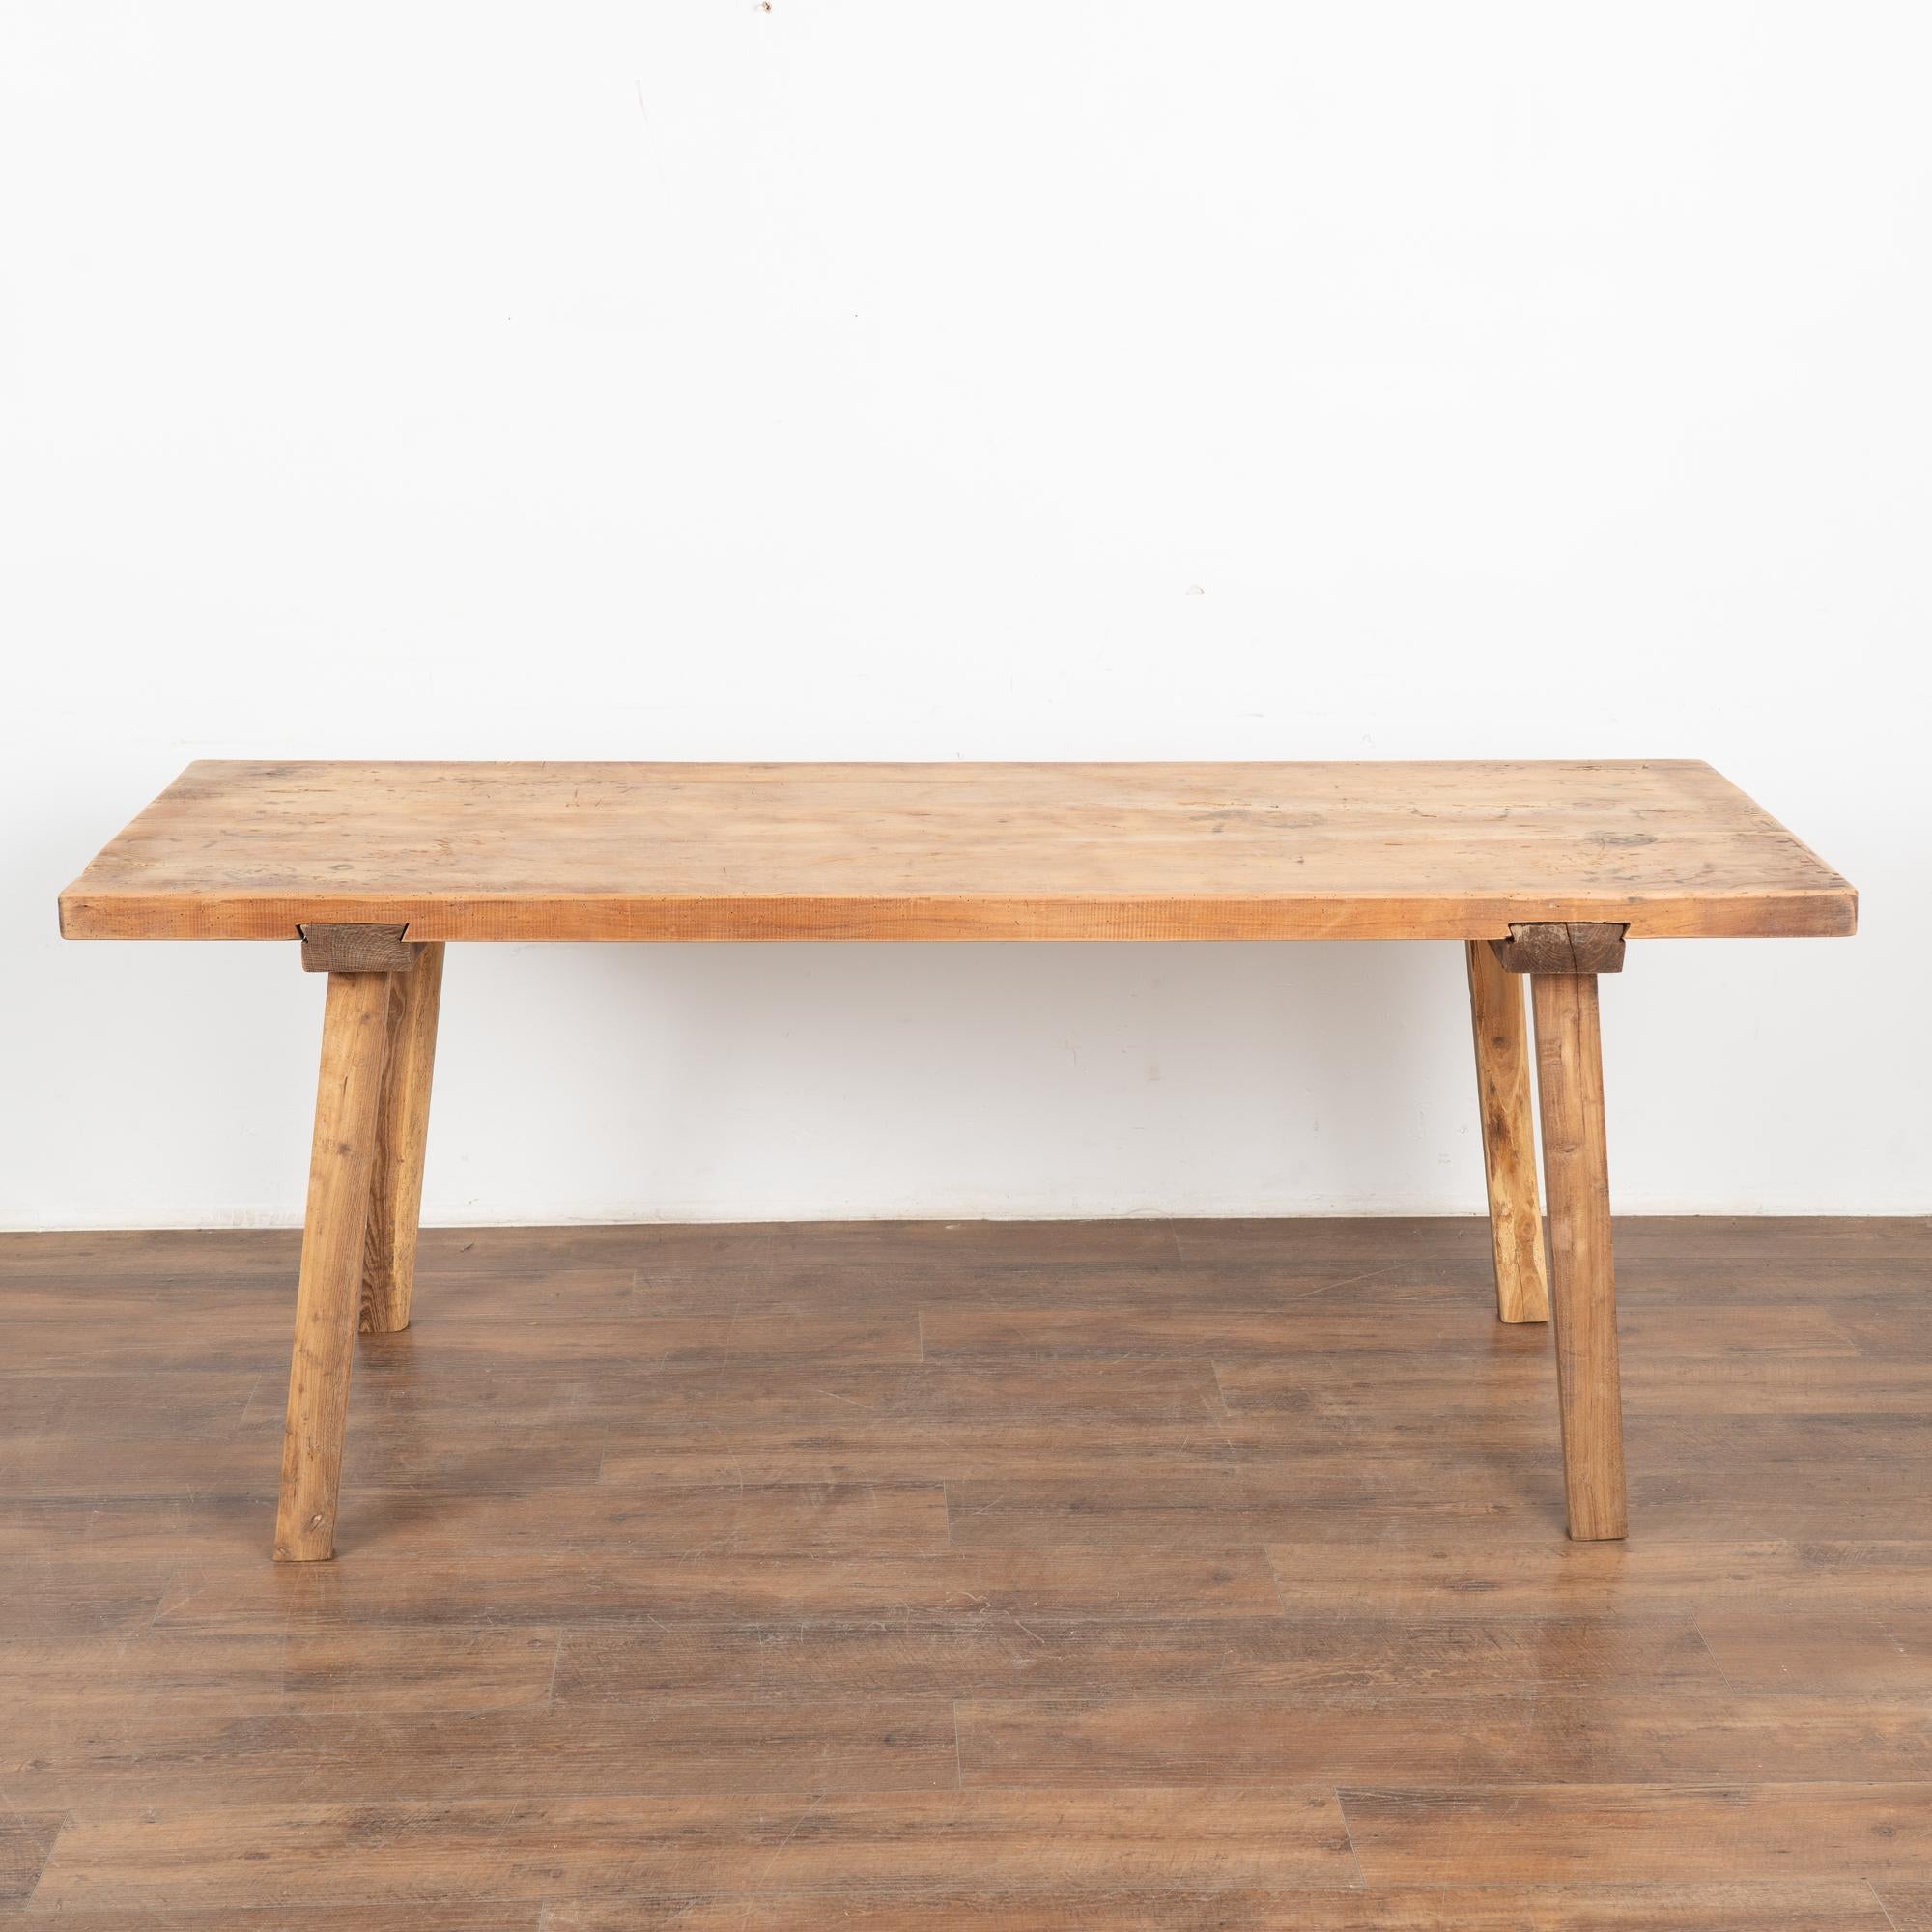 Rustic Plank Top Console Table With Peg Legs, Hungary circa 1900 For Sale 2